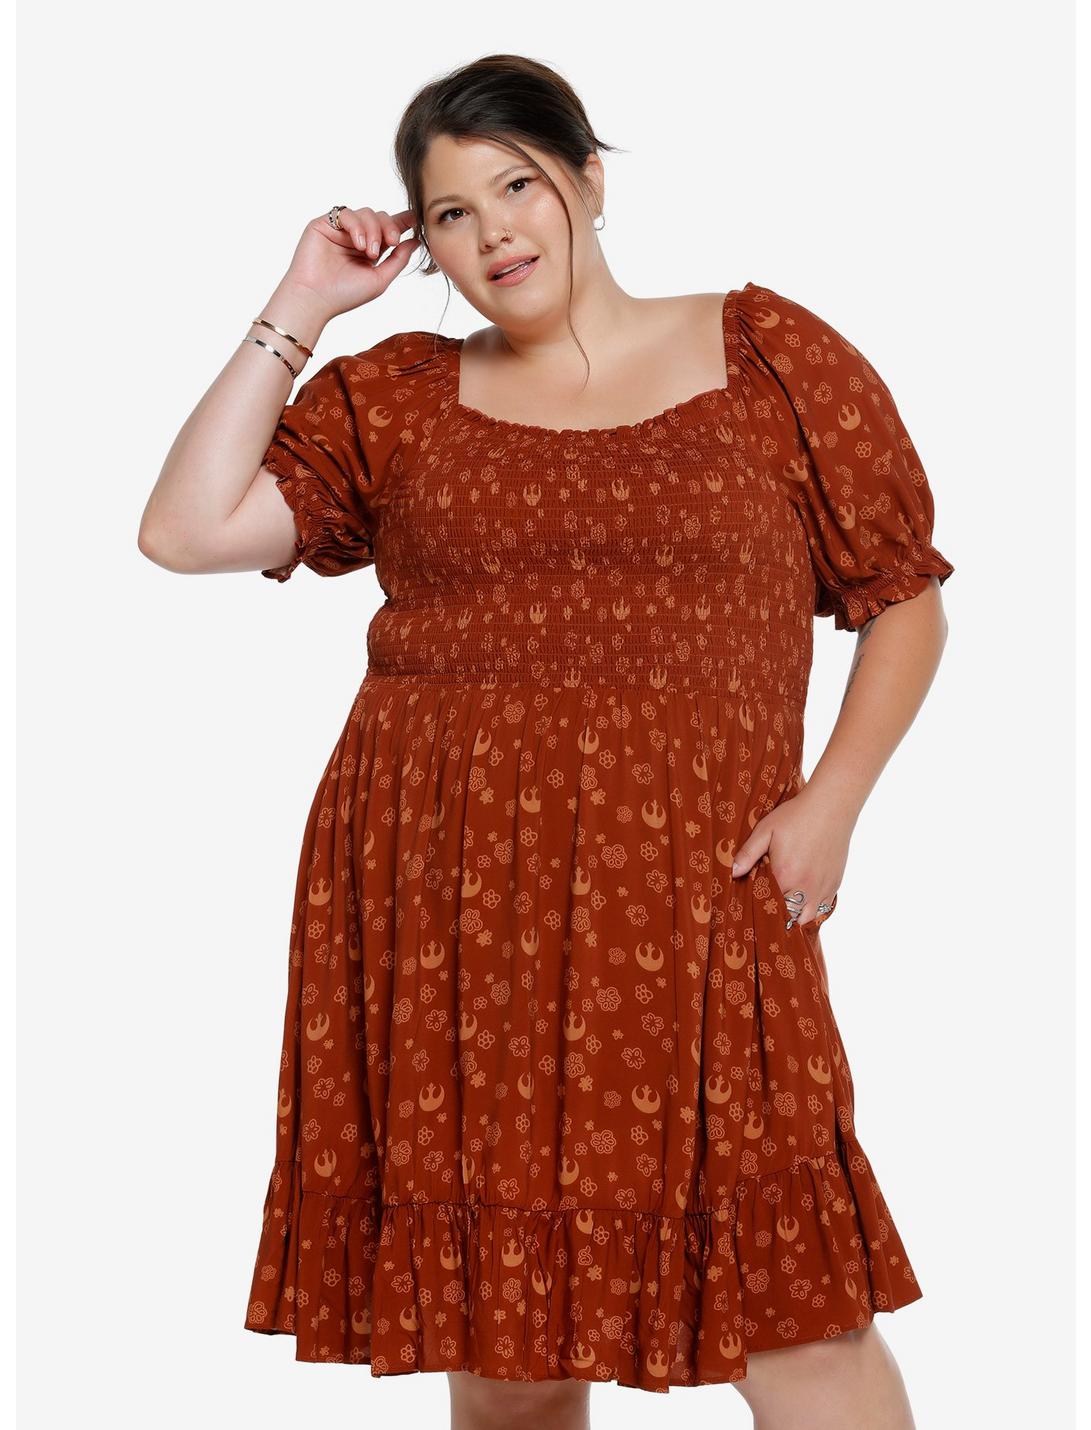 Her Universe Star Wars Rebellion Floral Allover Print Plus Size Smock Dress - BoxLunch Exclusive, RUST, hi-res